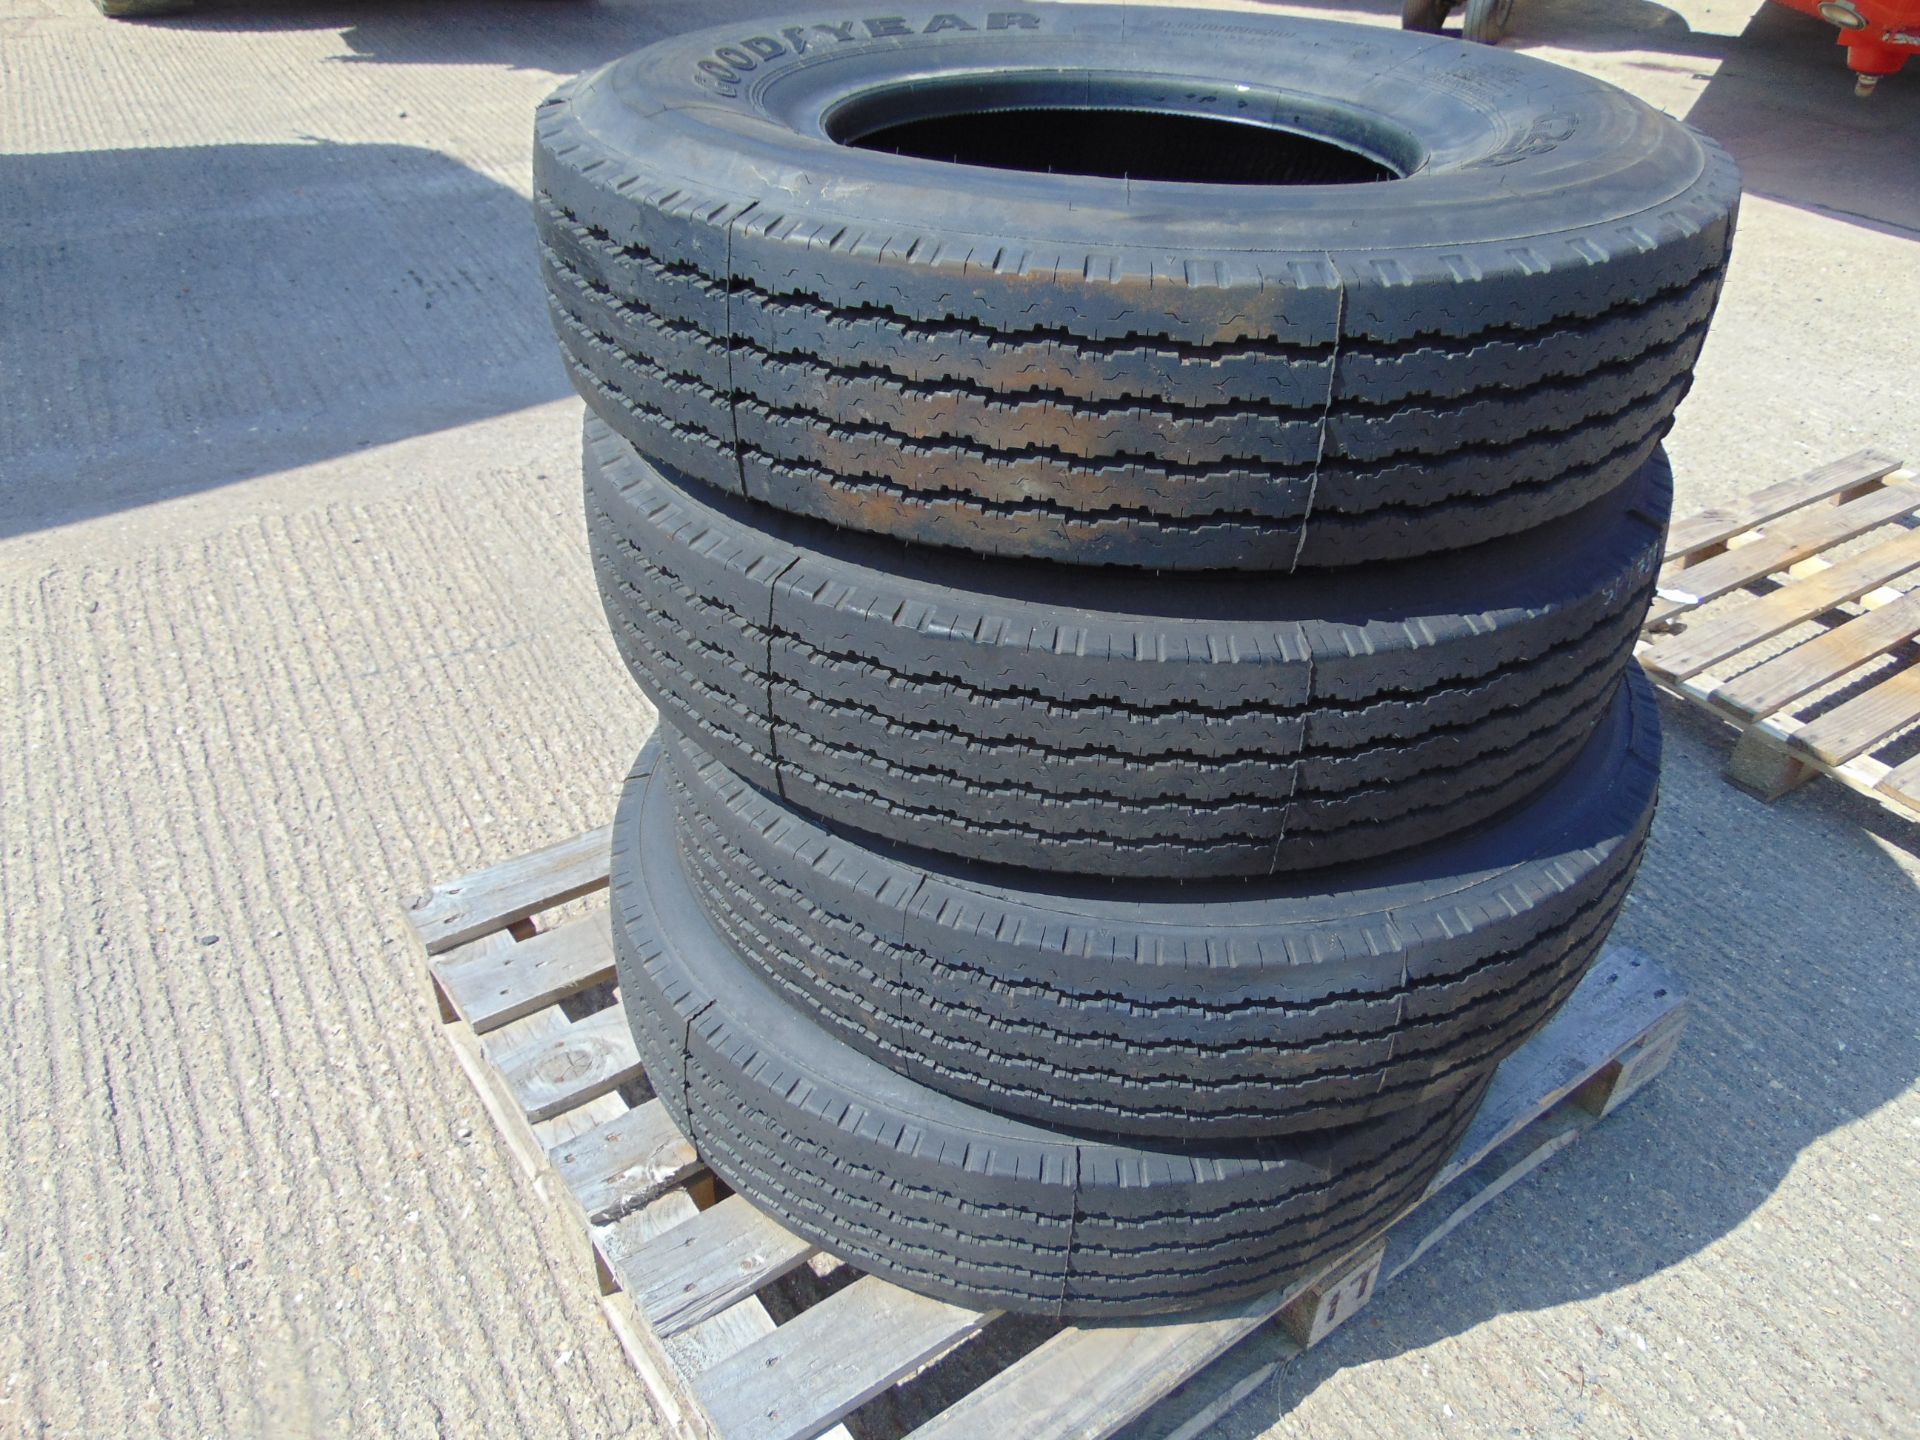 4 x Goodyear G293 9.00R20 14 Ply Tyres - Image 6 of 6